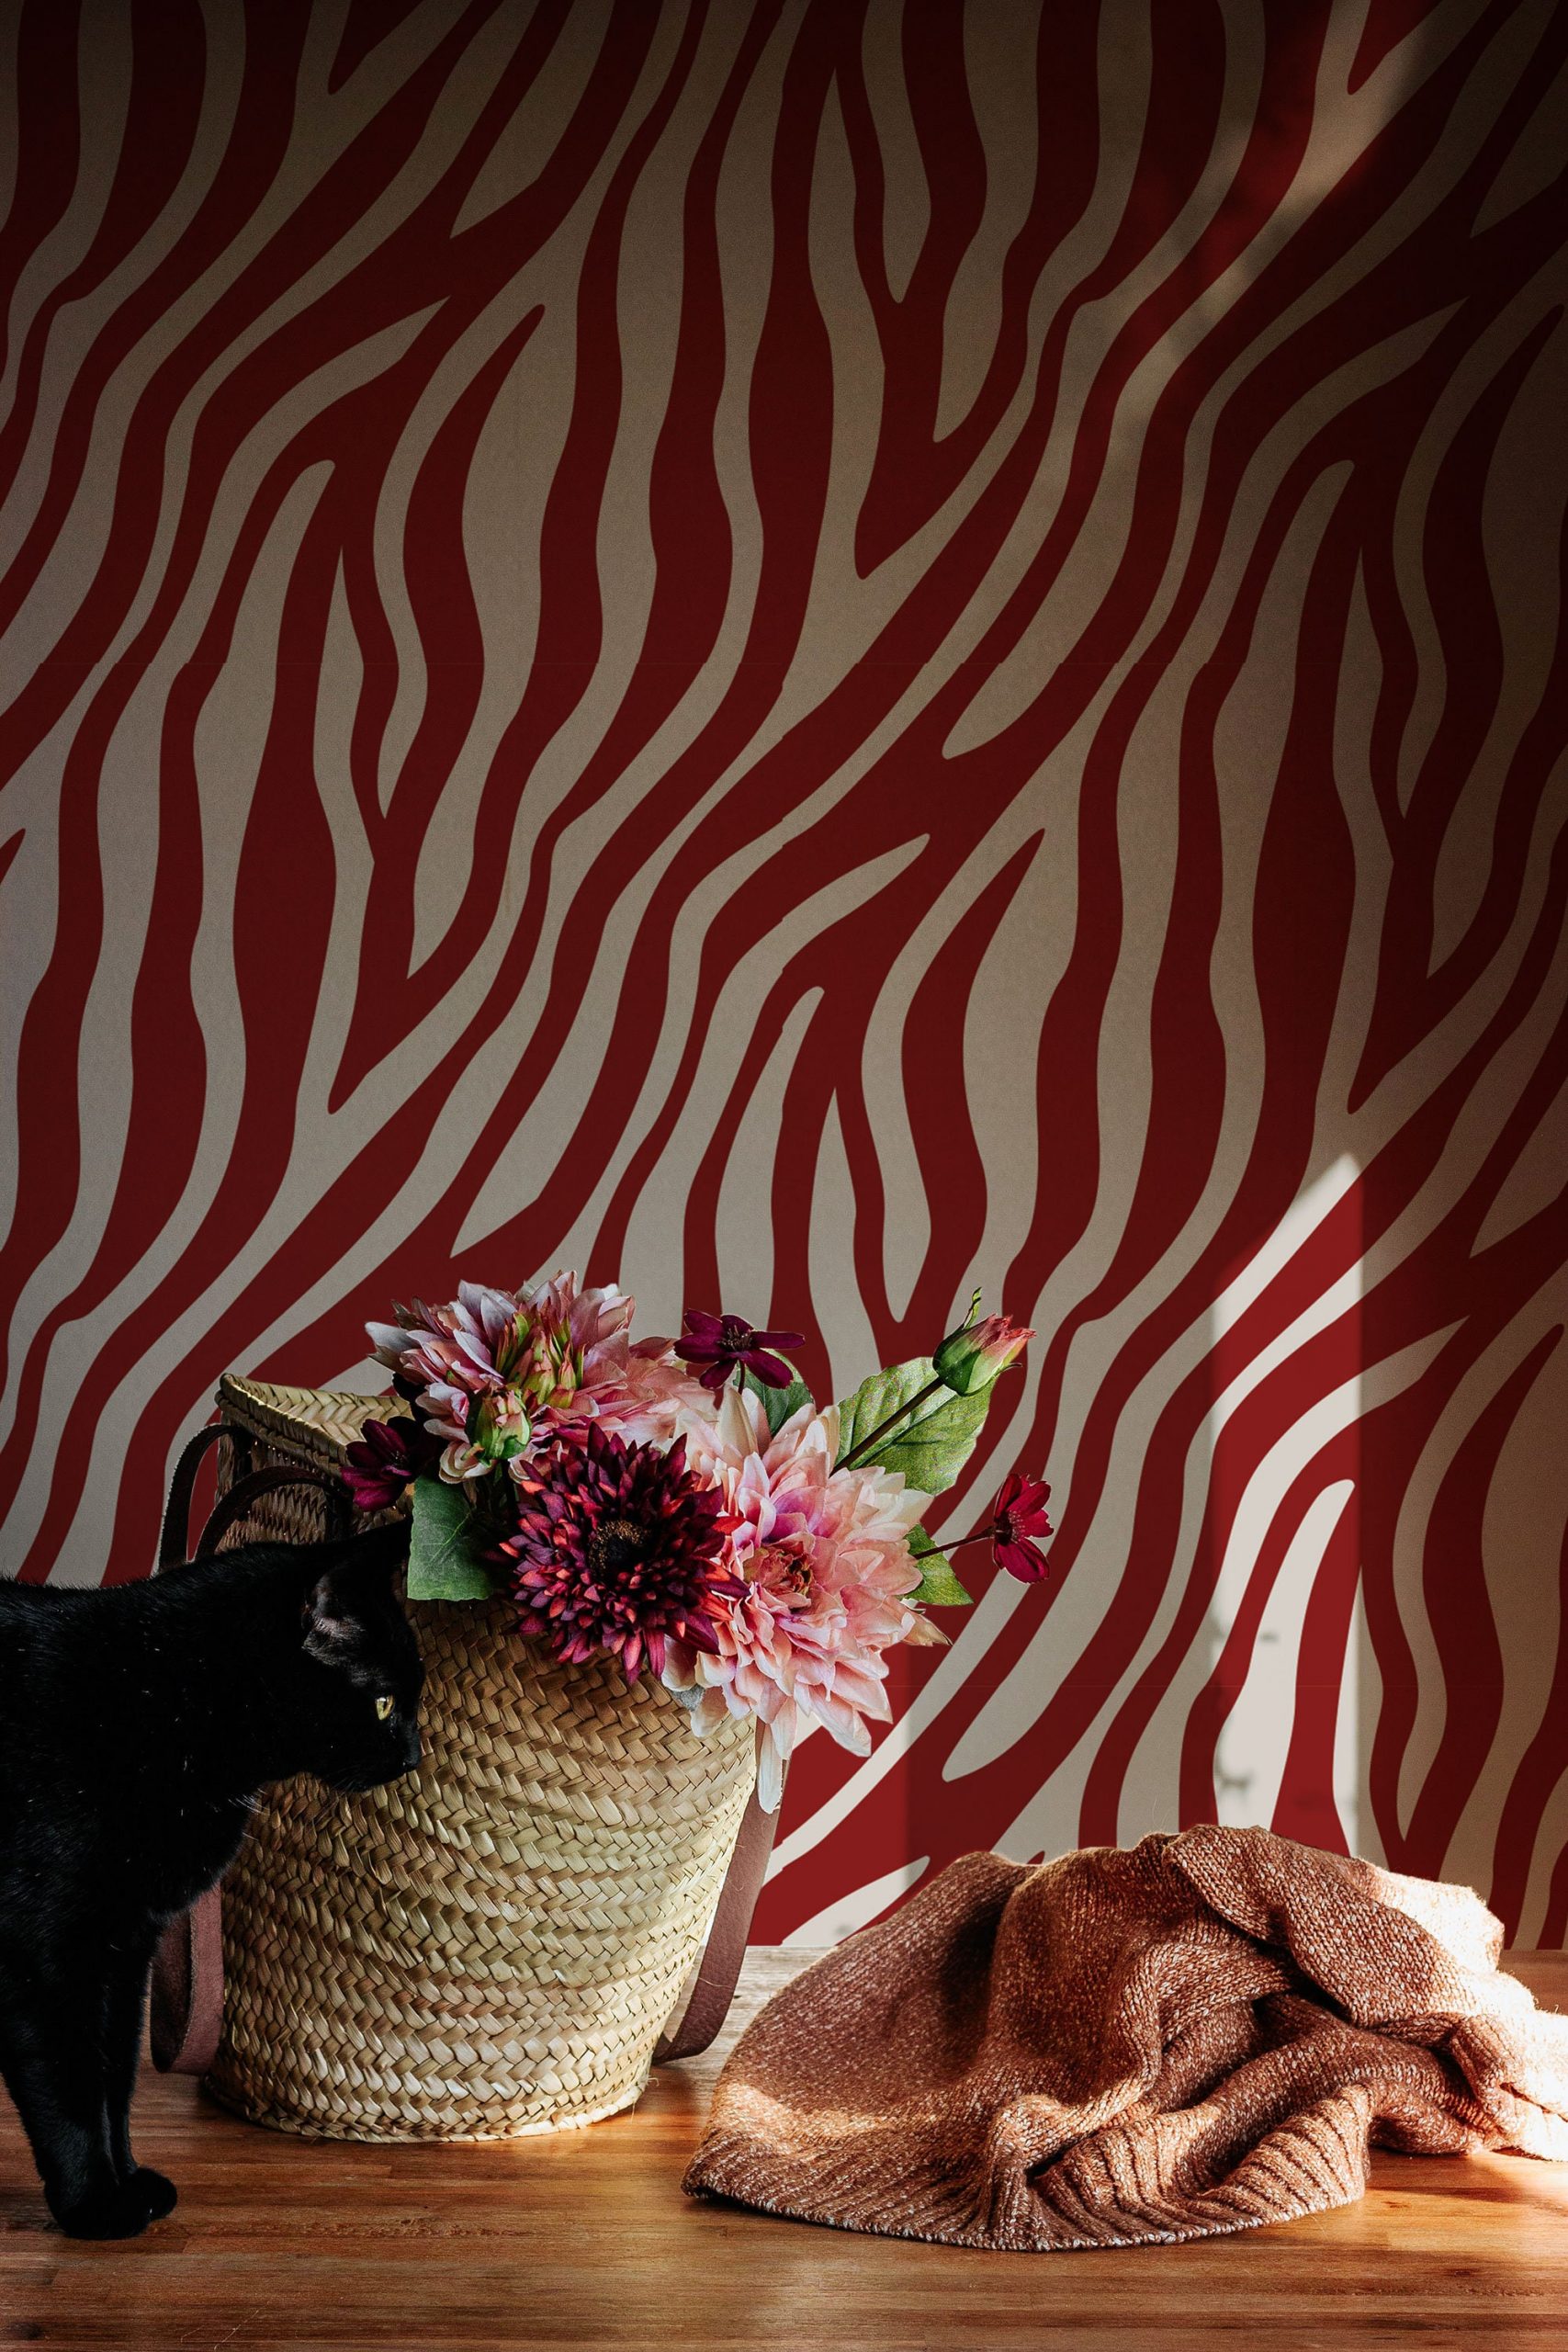 Red Zebra Wallpaper Wall Covering Self Adhesive Peel And Stick